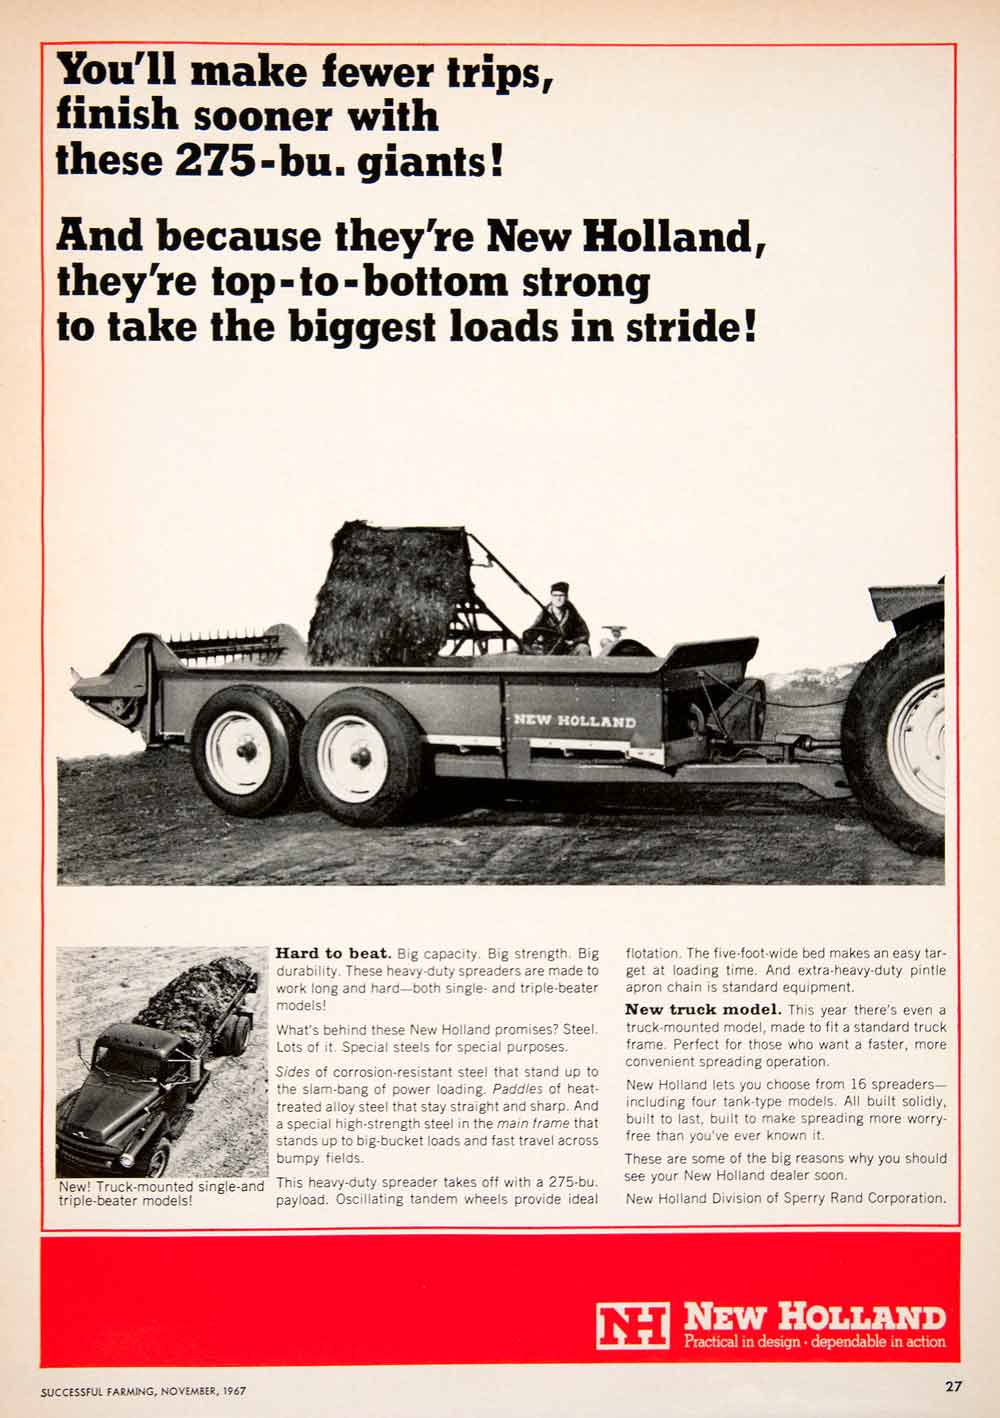 1967 Ad New Holland Sperry Rand Tractor Load Truck Model Farming Agriculture SF1